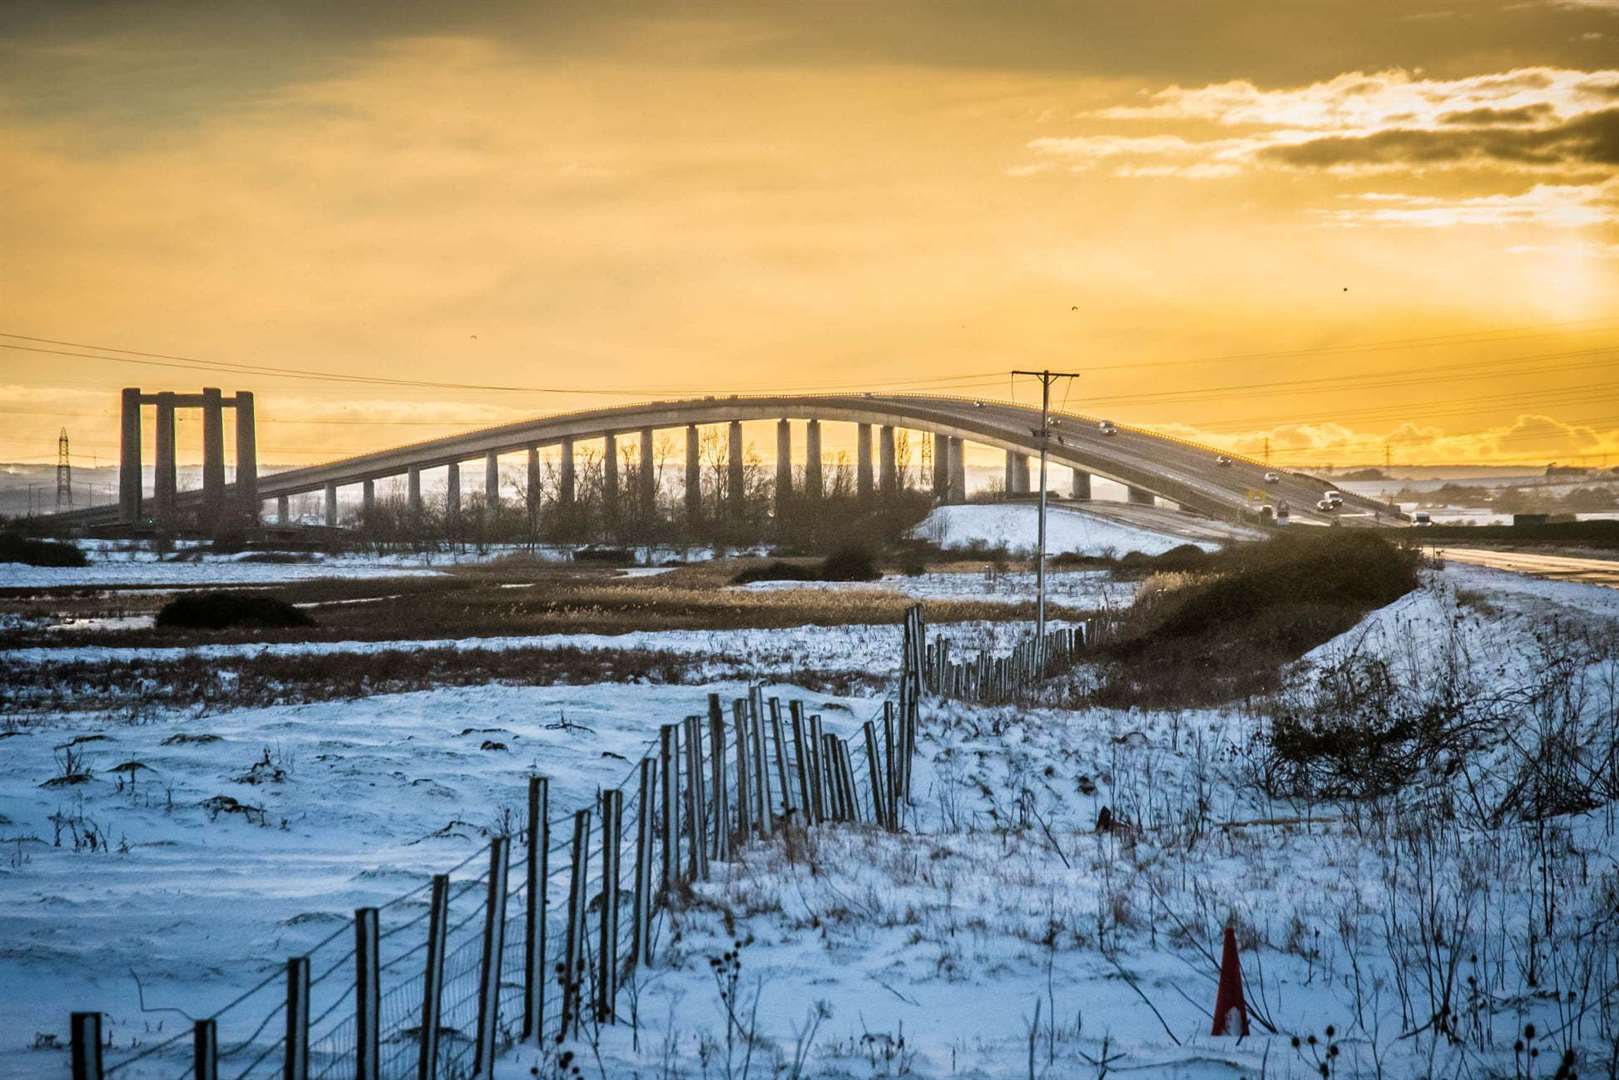 Sunset and snow of the Isle of Sheppey captured by Joanna Araujo